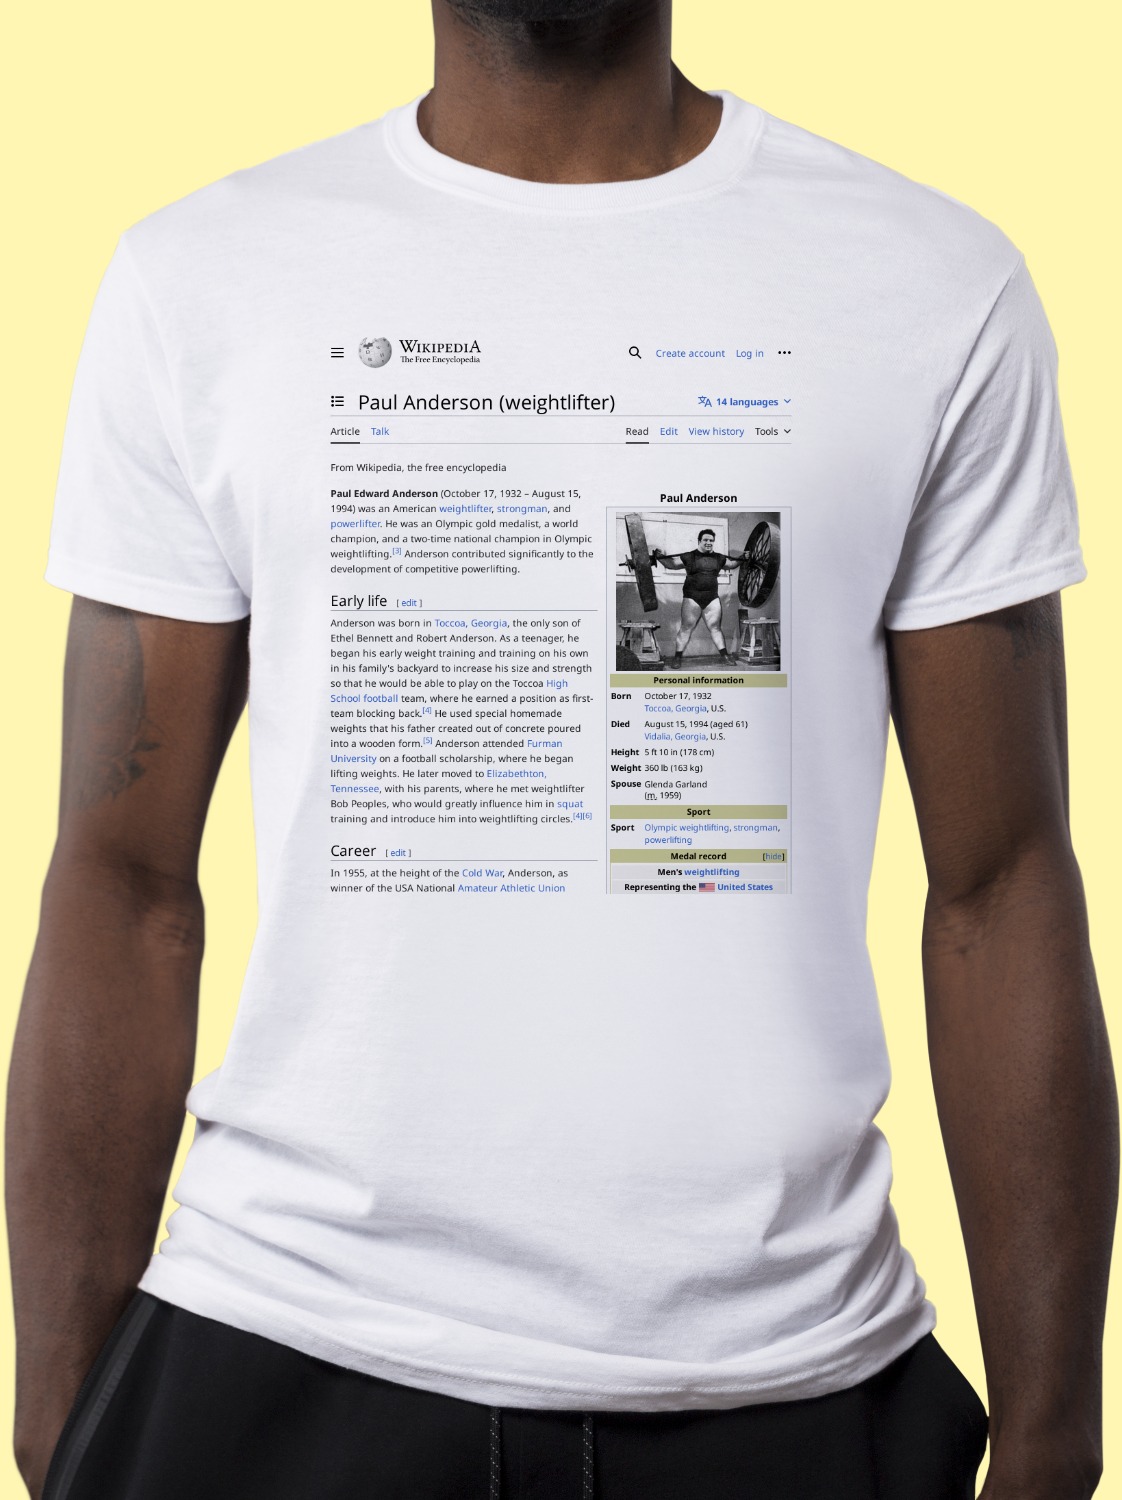 Paul_Anderson_(weightlifter) Wikipedia Shirt